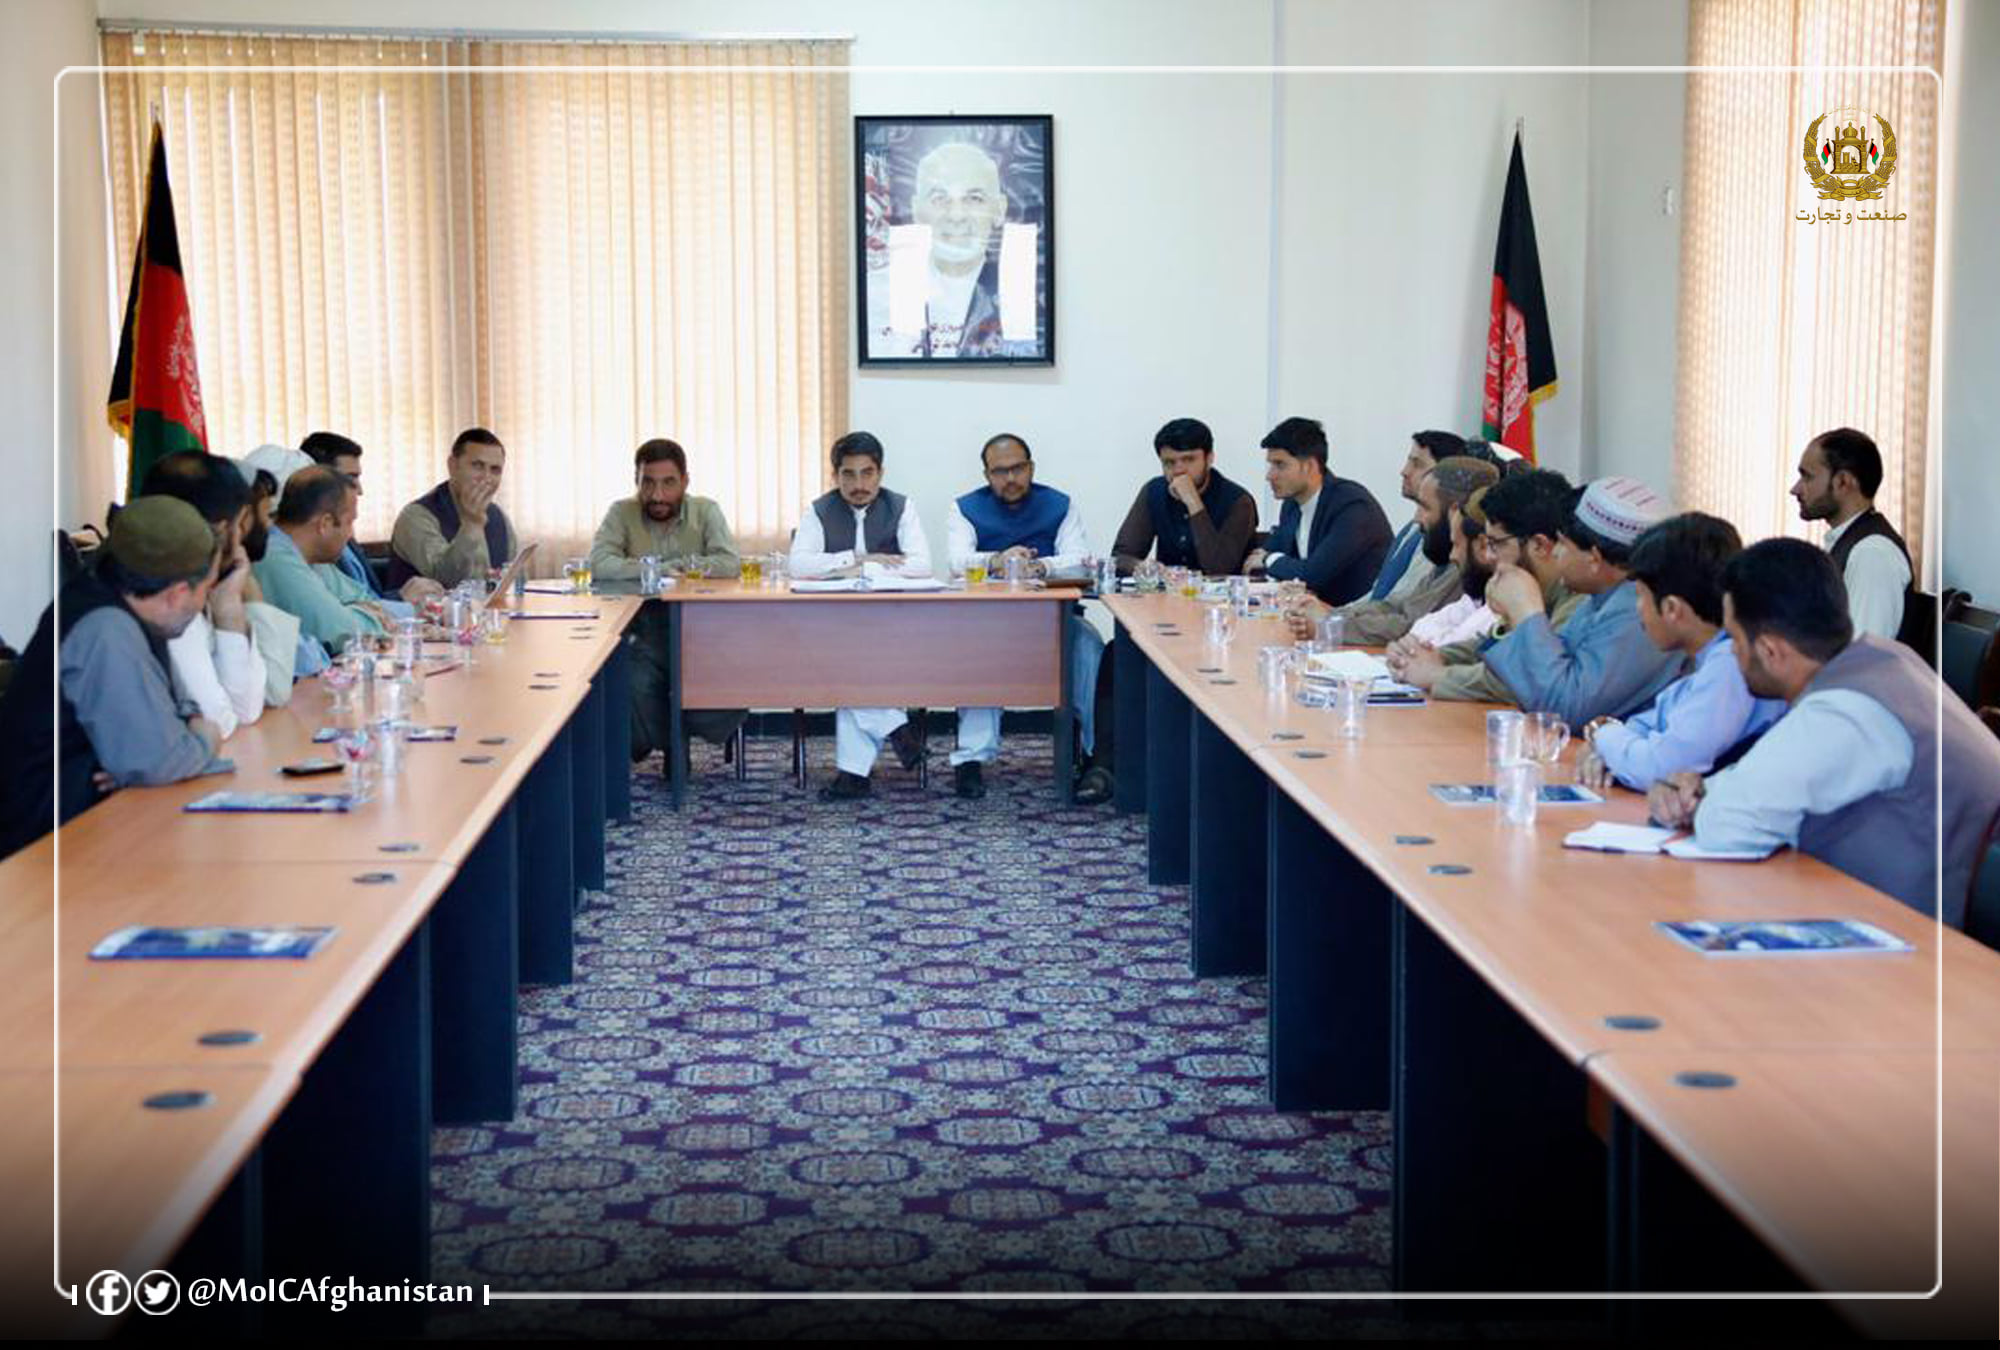 Deputy Minister of Industry and Commerce Meets with employees of the Department of Industry and Commerce of Kandahar Province